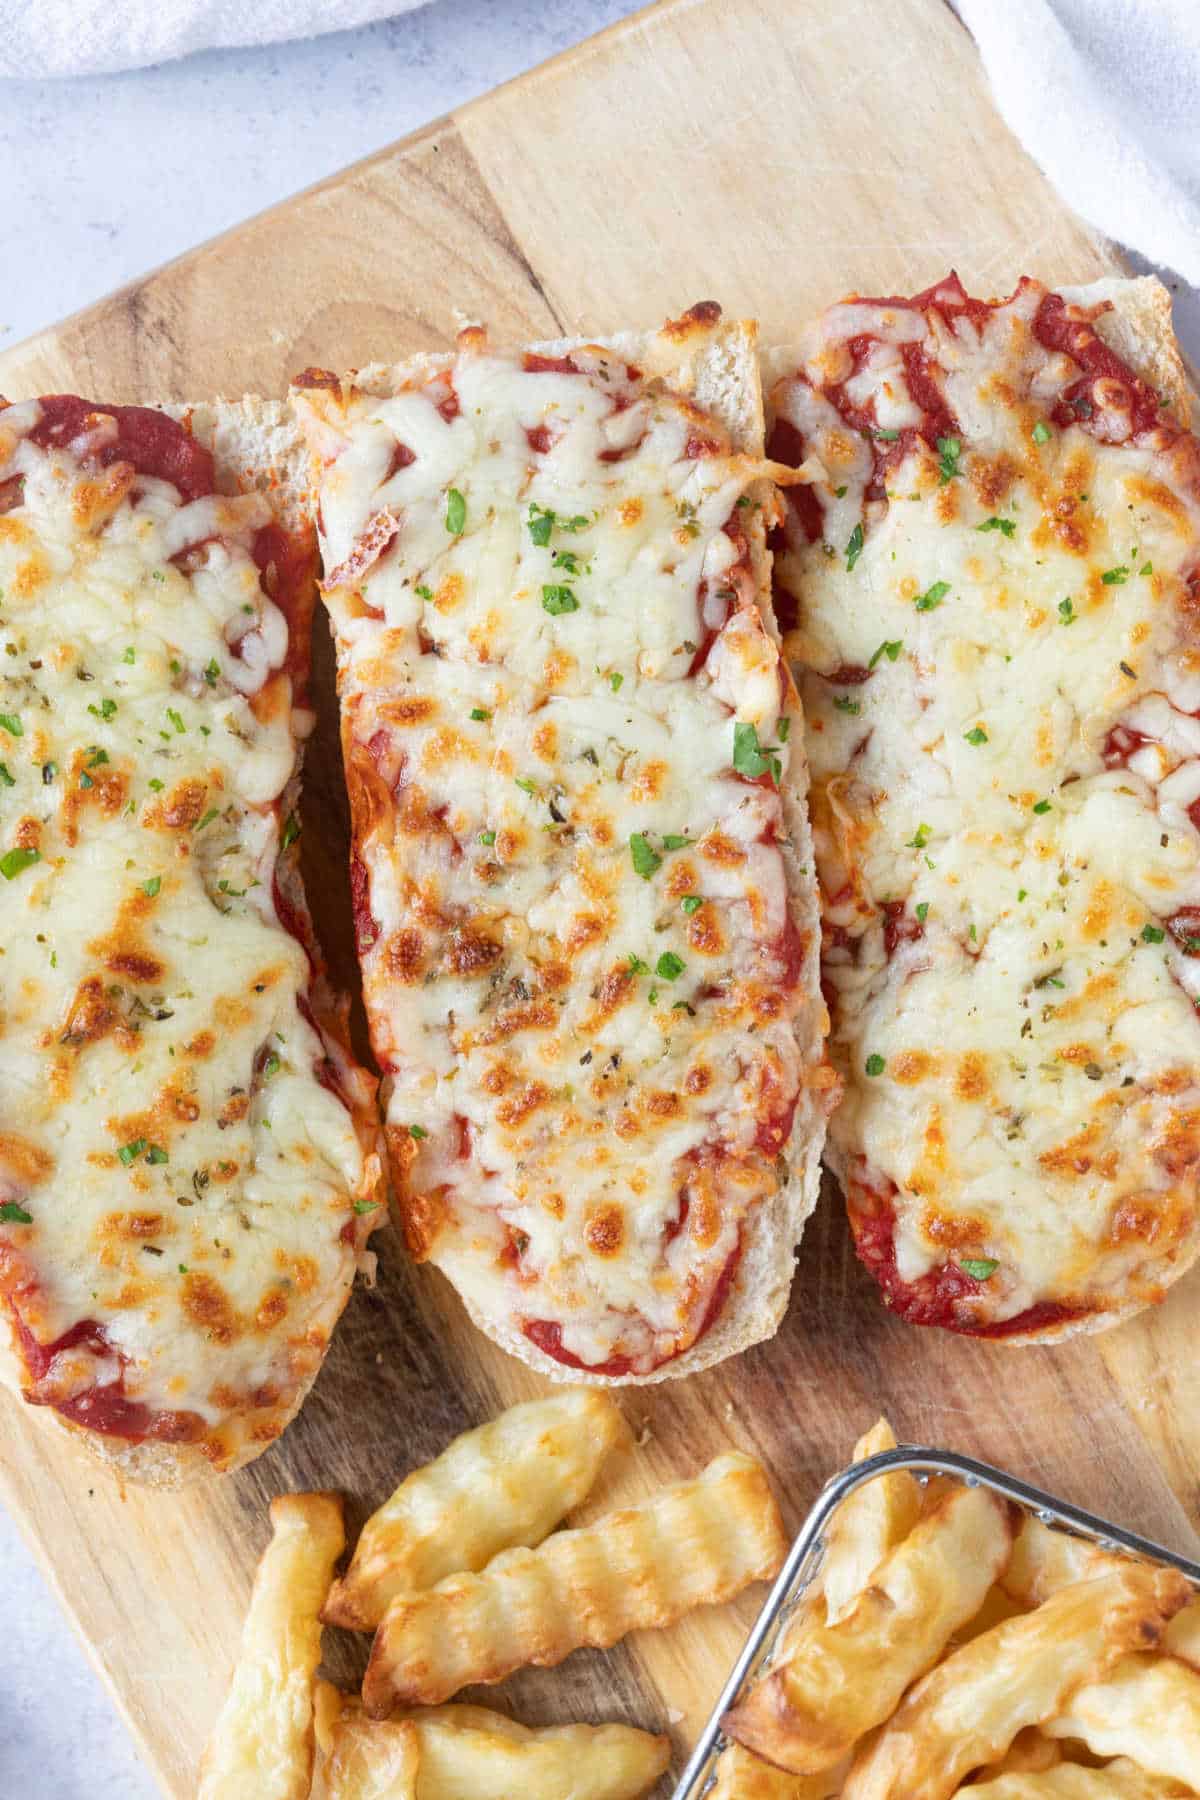 Air fryer French bread pizzas on a wooden board.